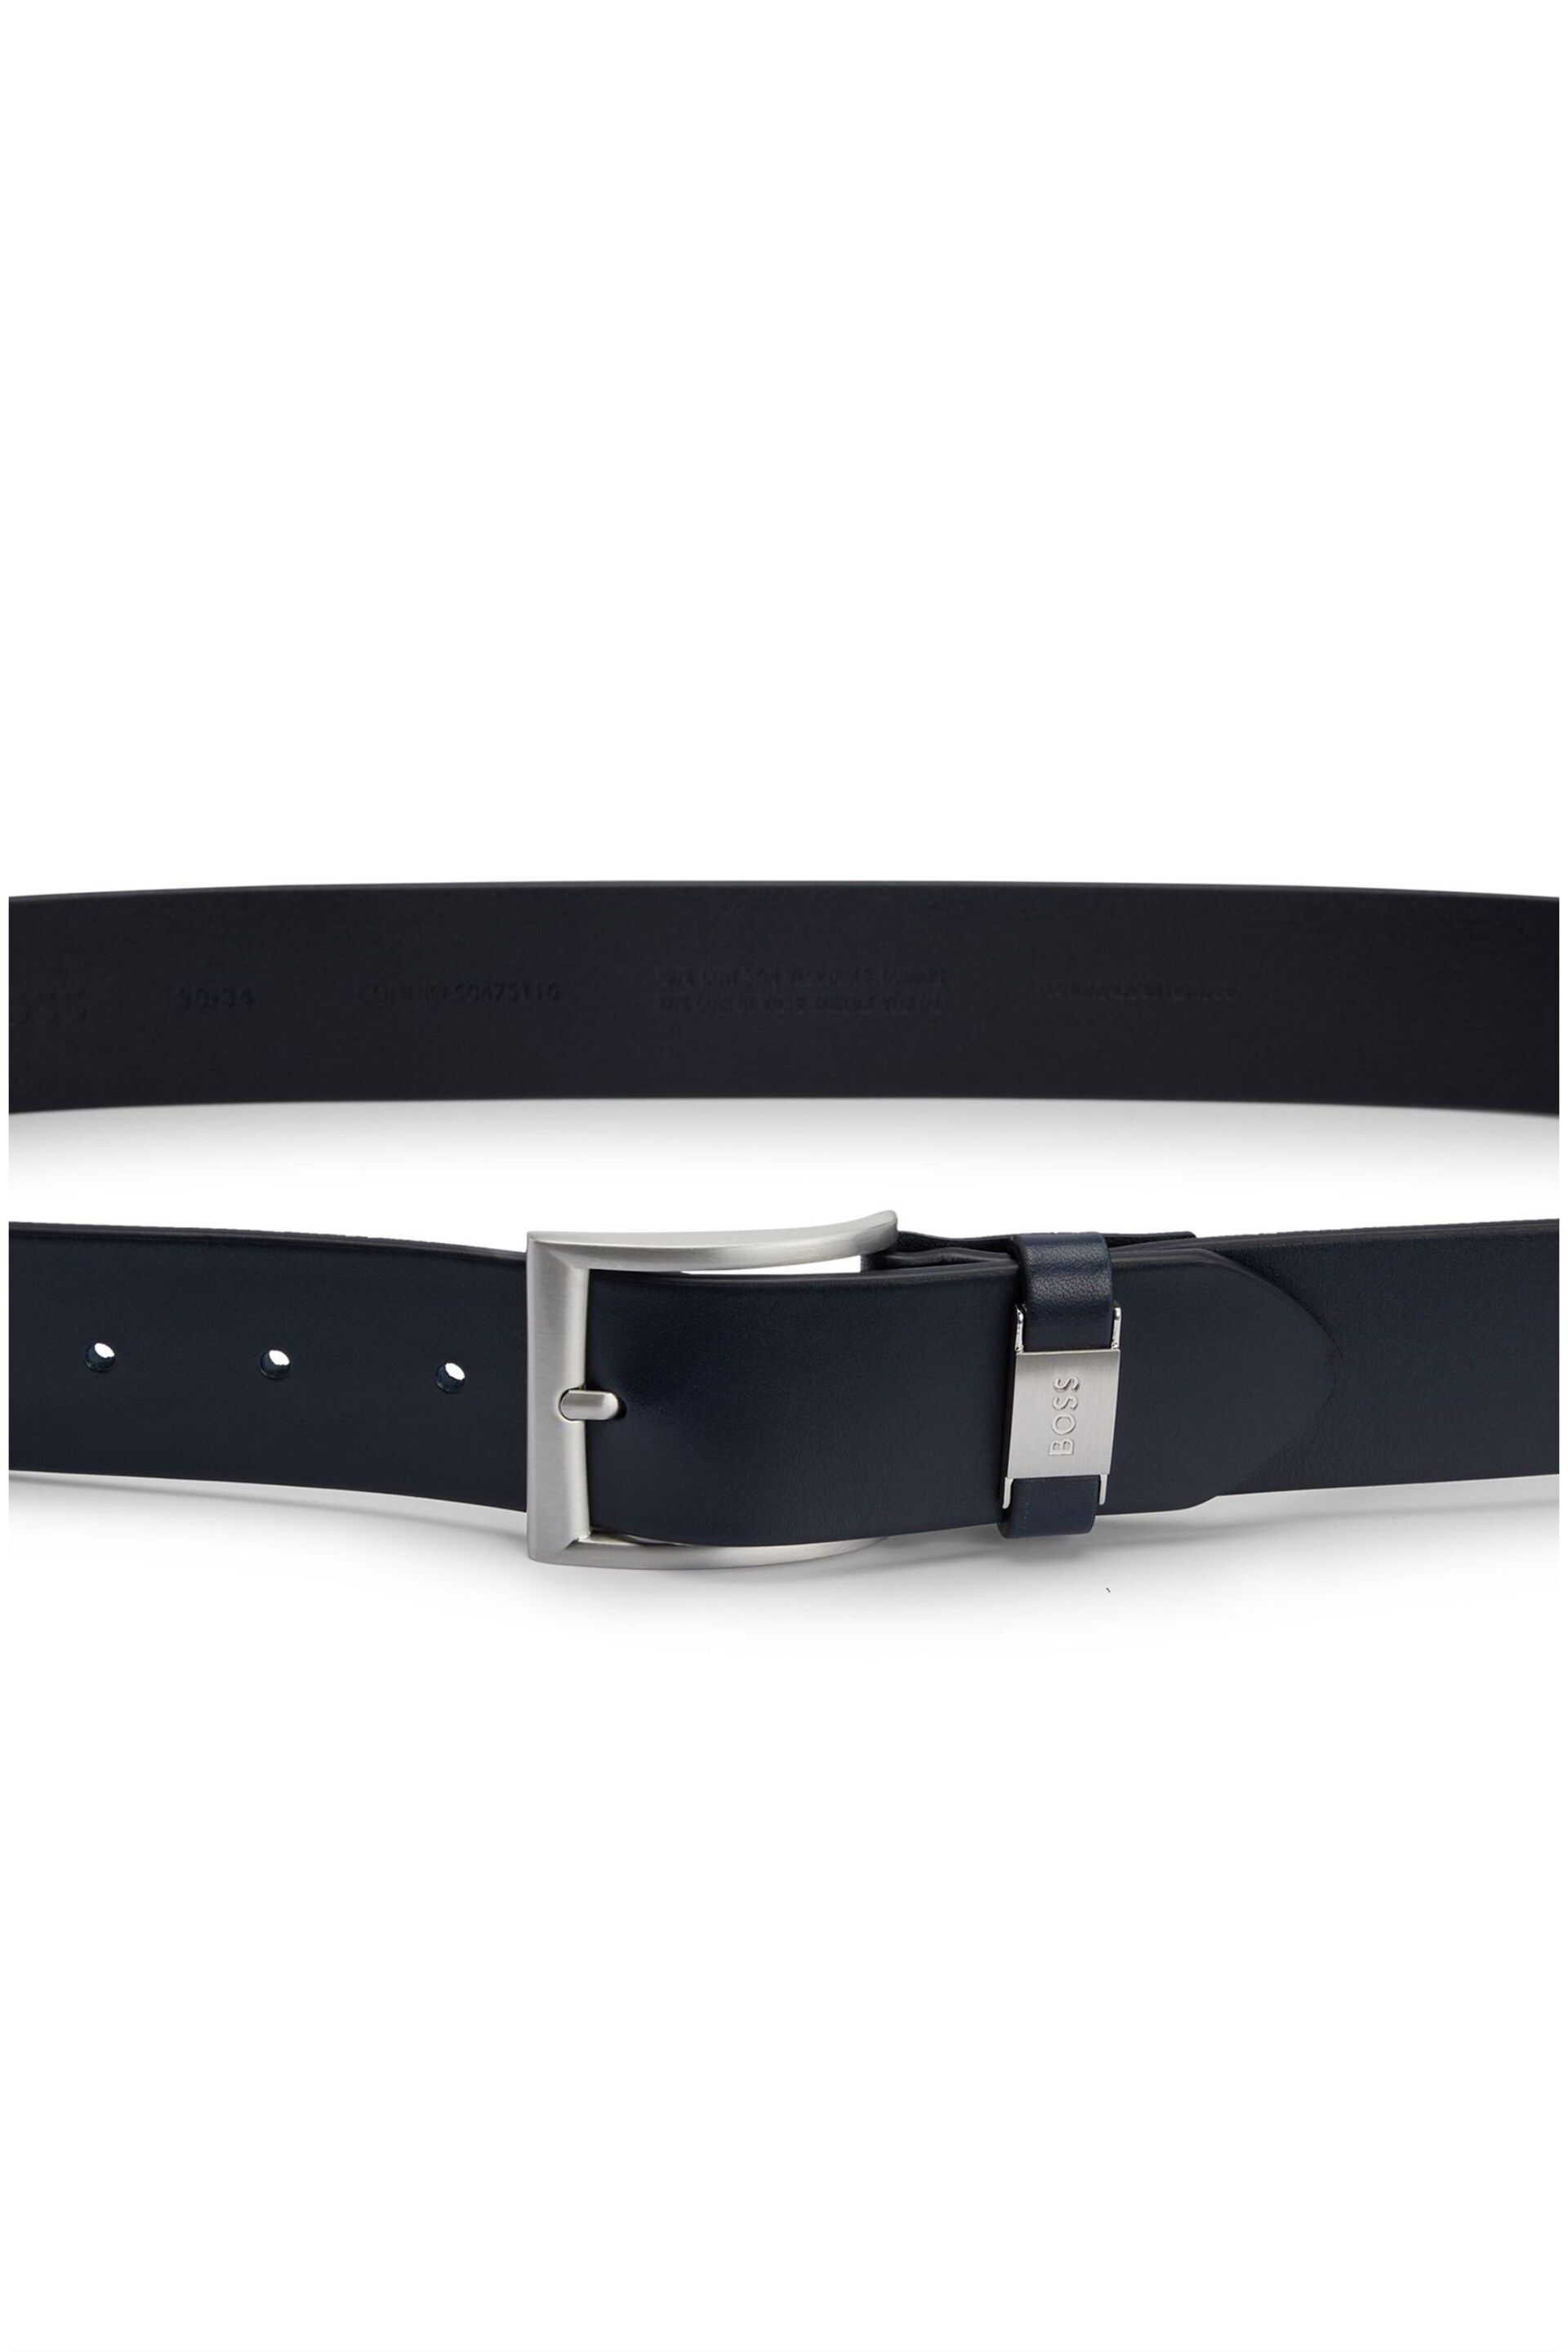 BOSS Navy Connio Smooth Leather Belt - Image 3 of 3